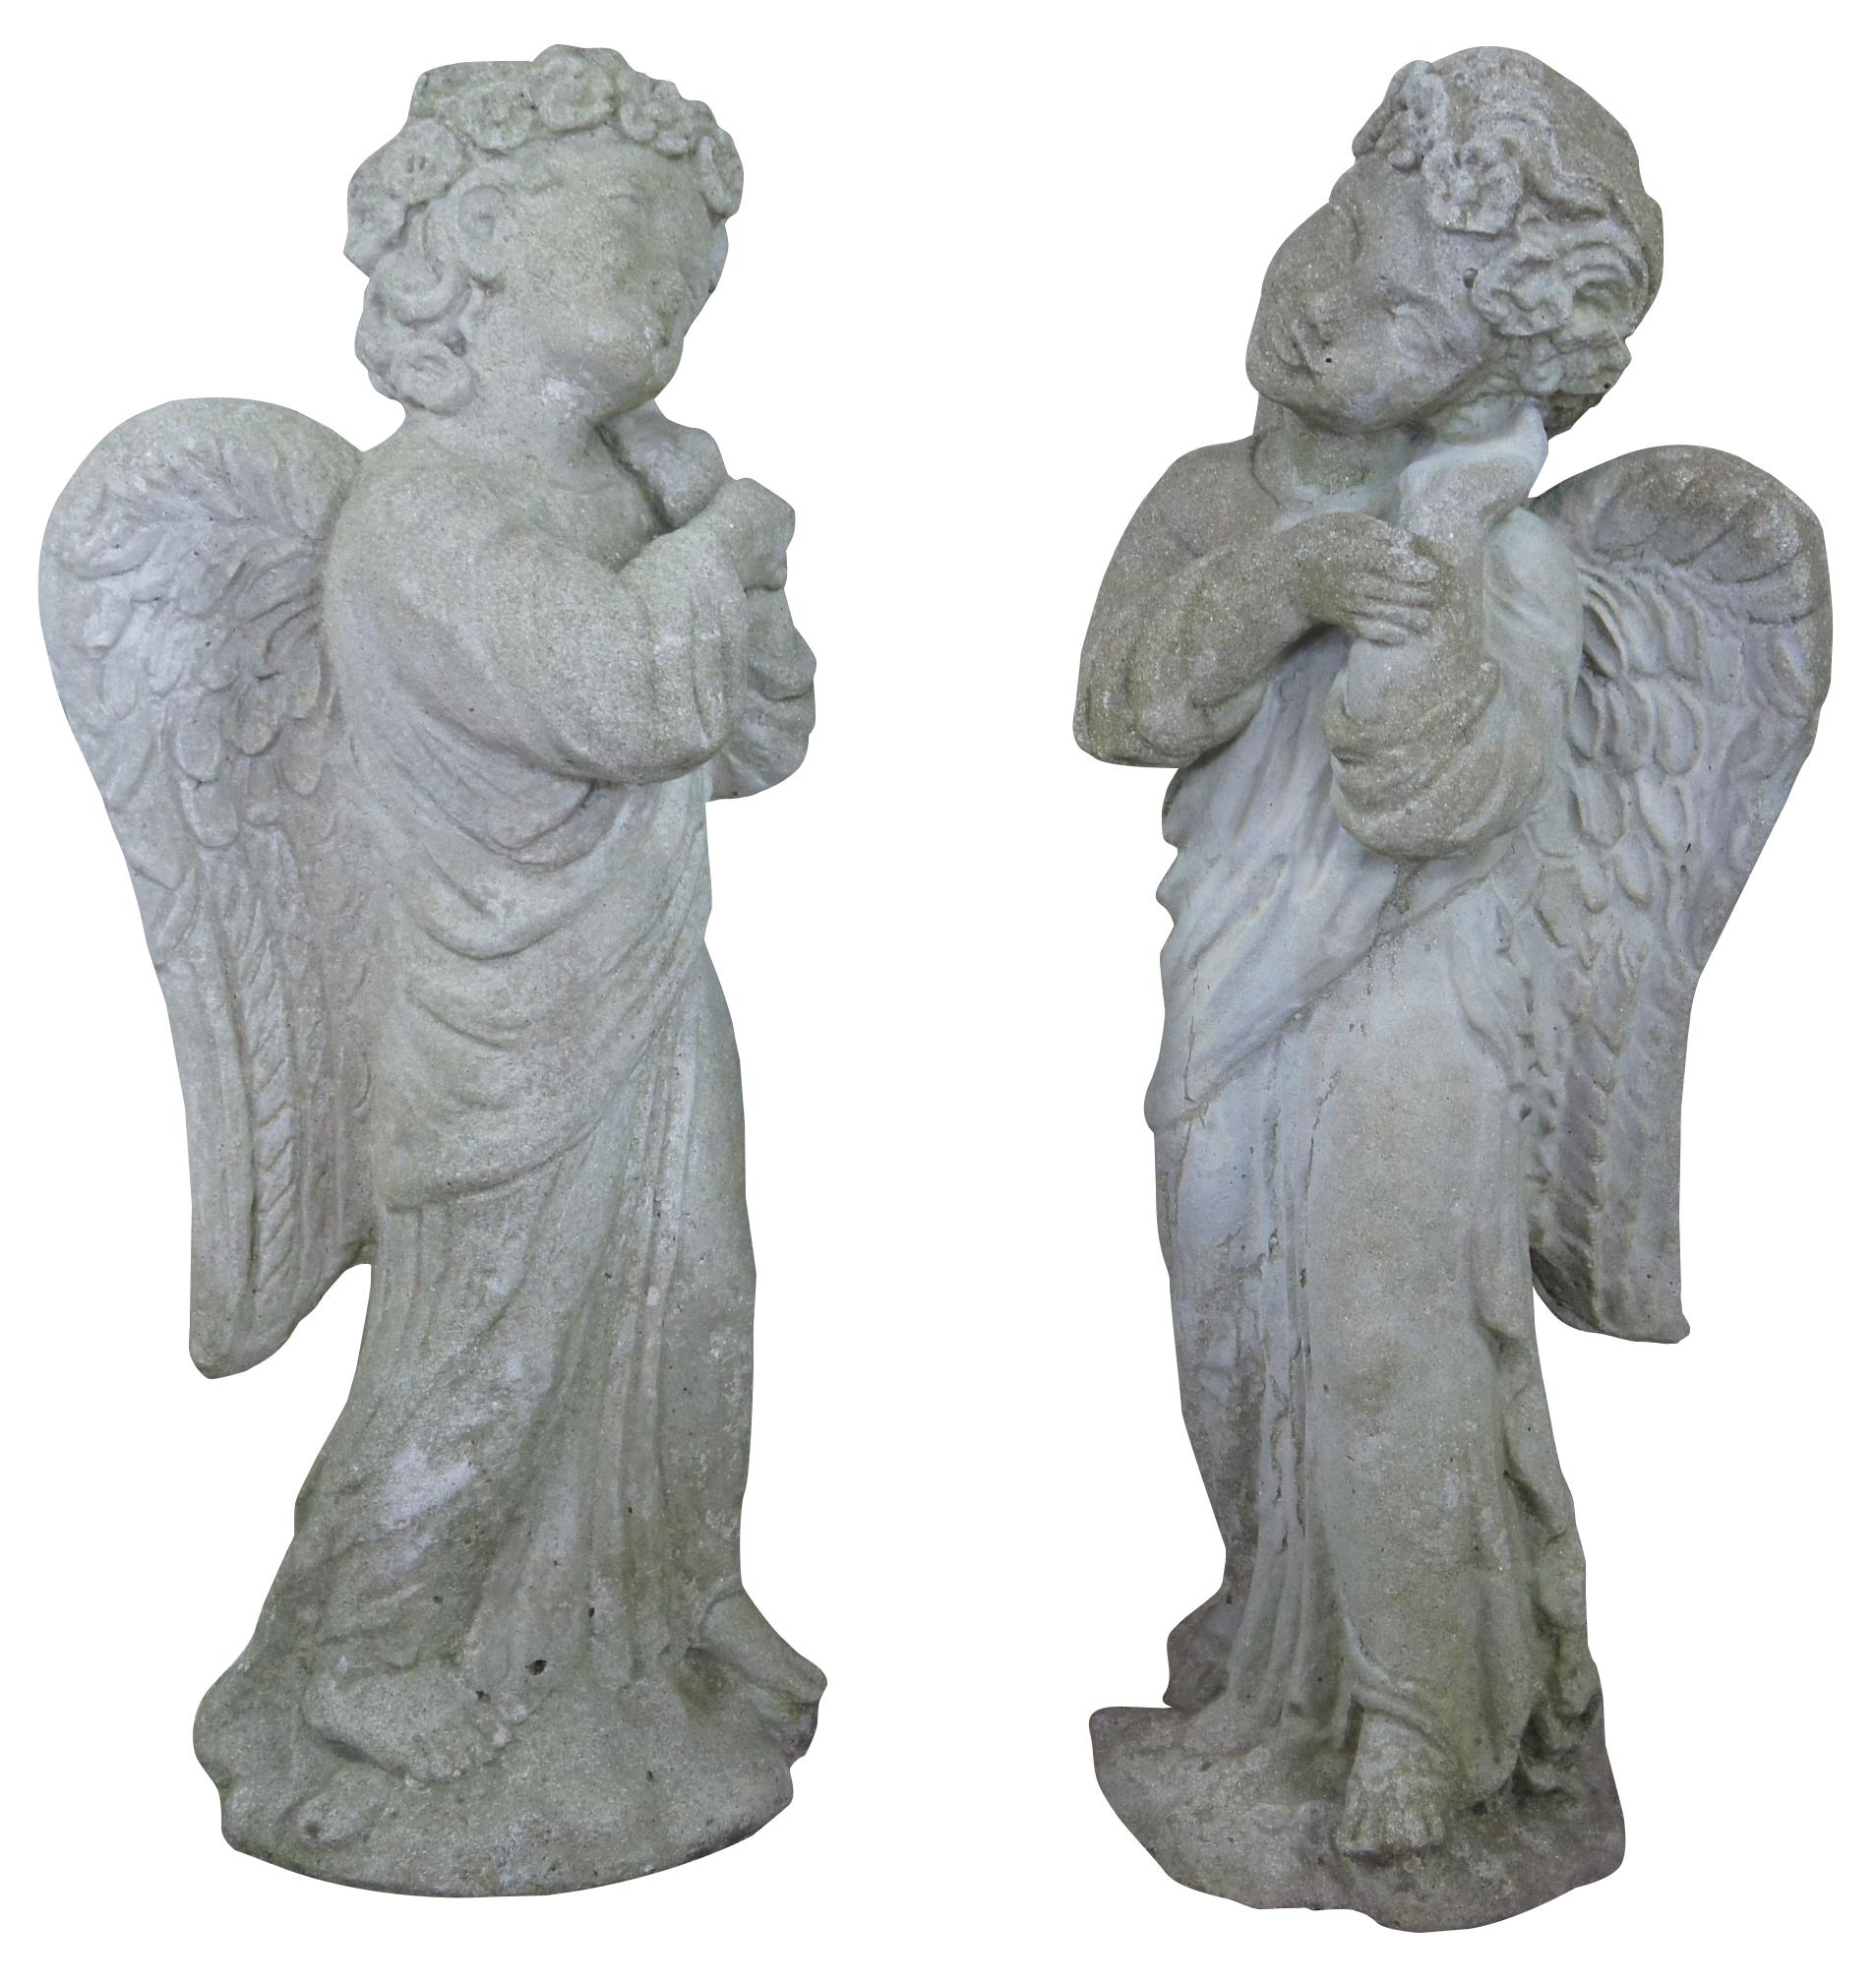 Circa 1980s concrete angel statues. Features a winged cherub pleasantly resting its head on hand with floral tiara. 

88 lb each.